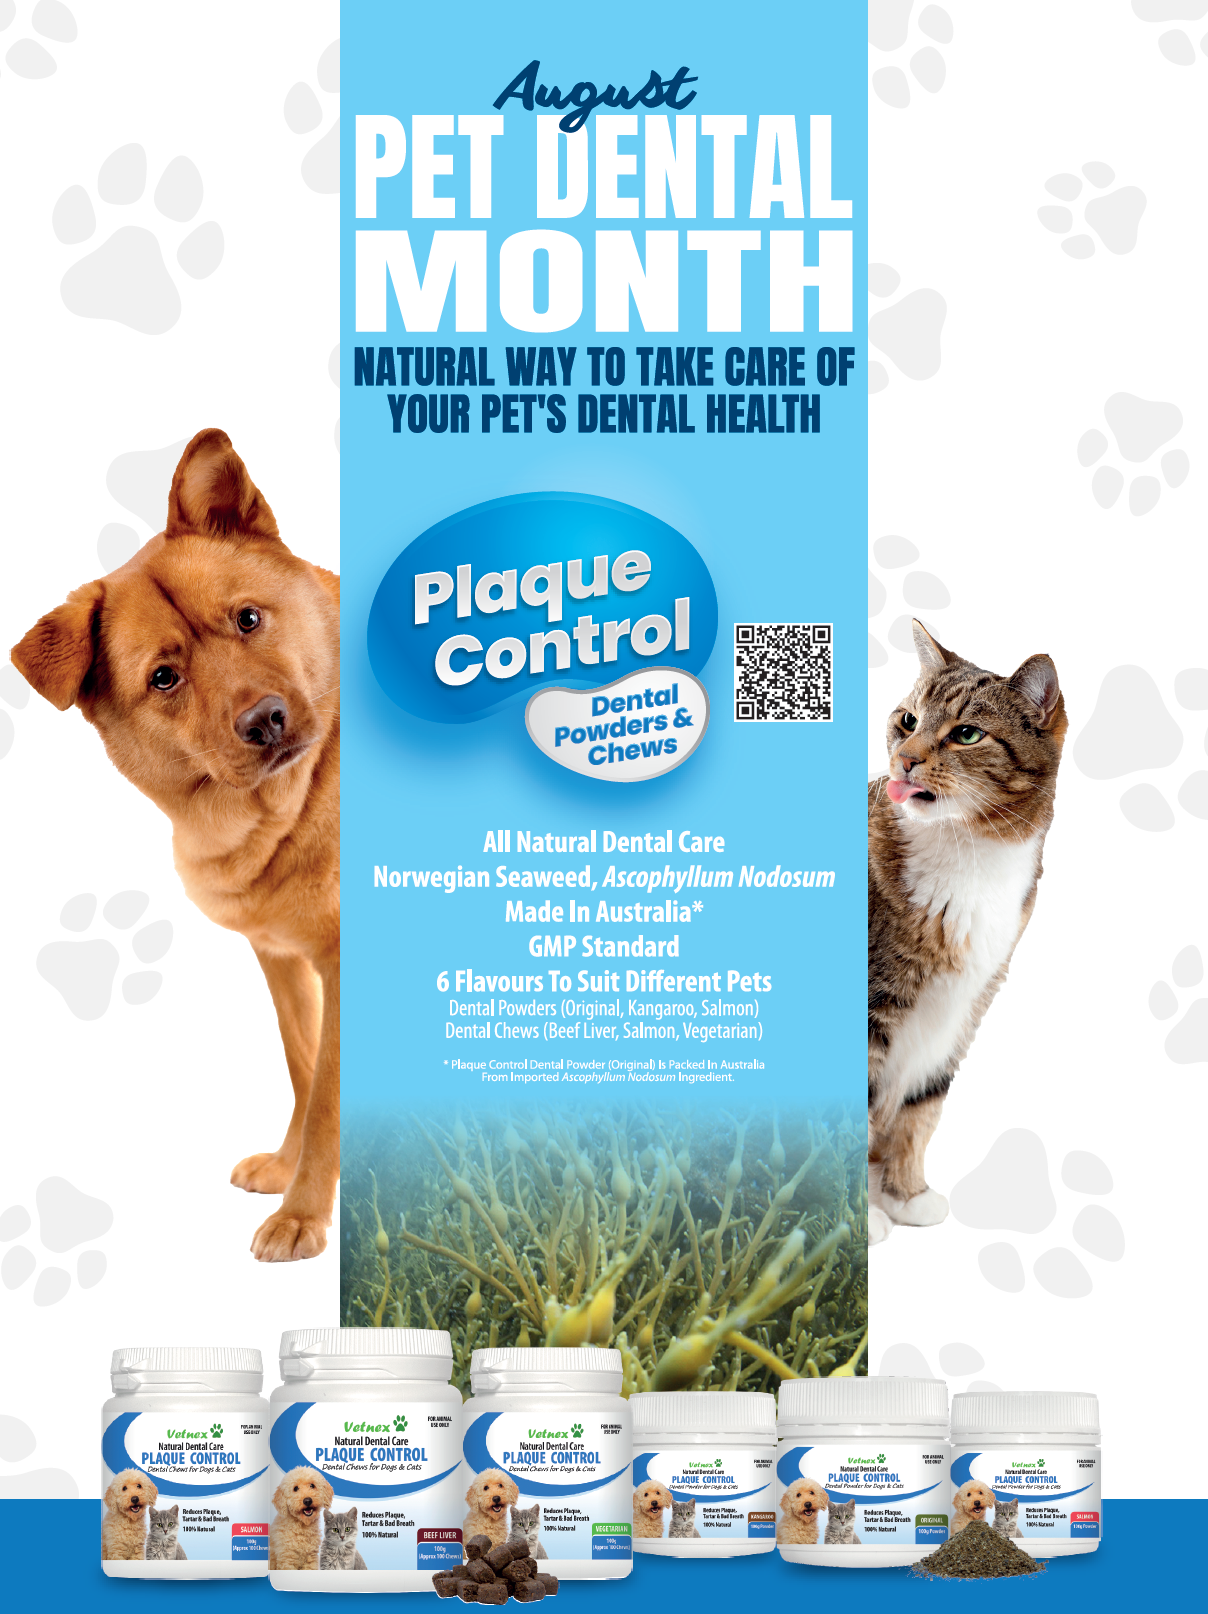 Let’s Focus on Pet’s Oral Health in August Pet Dental Month